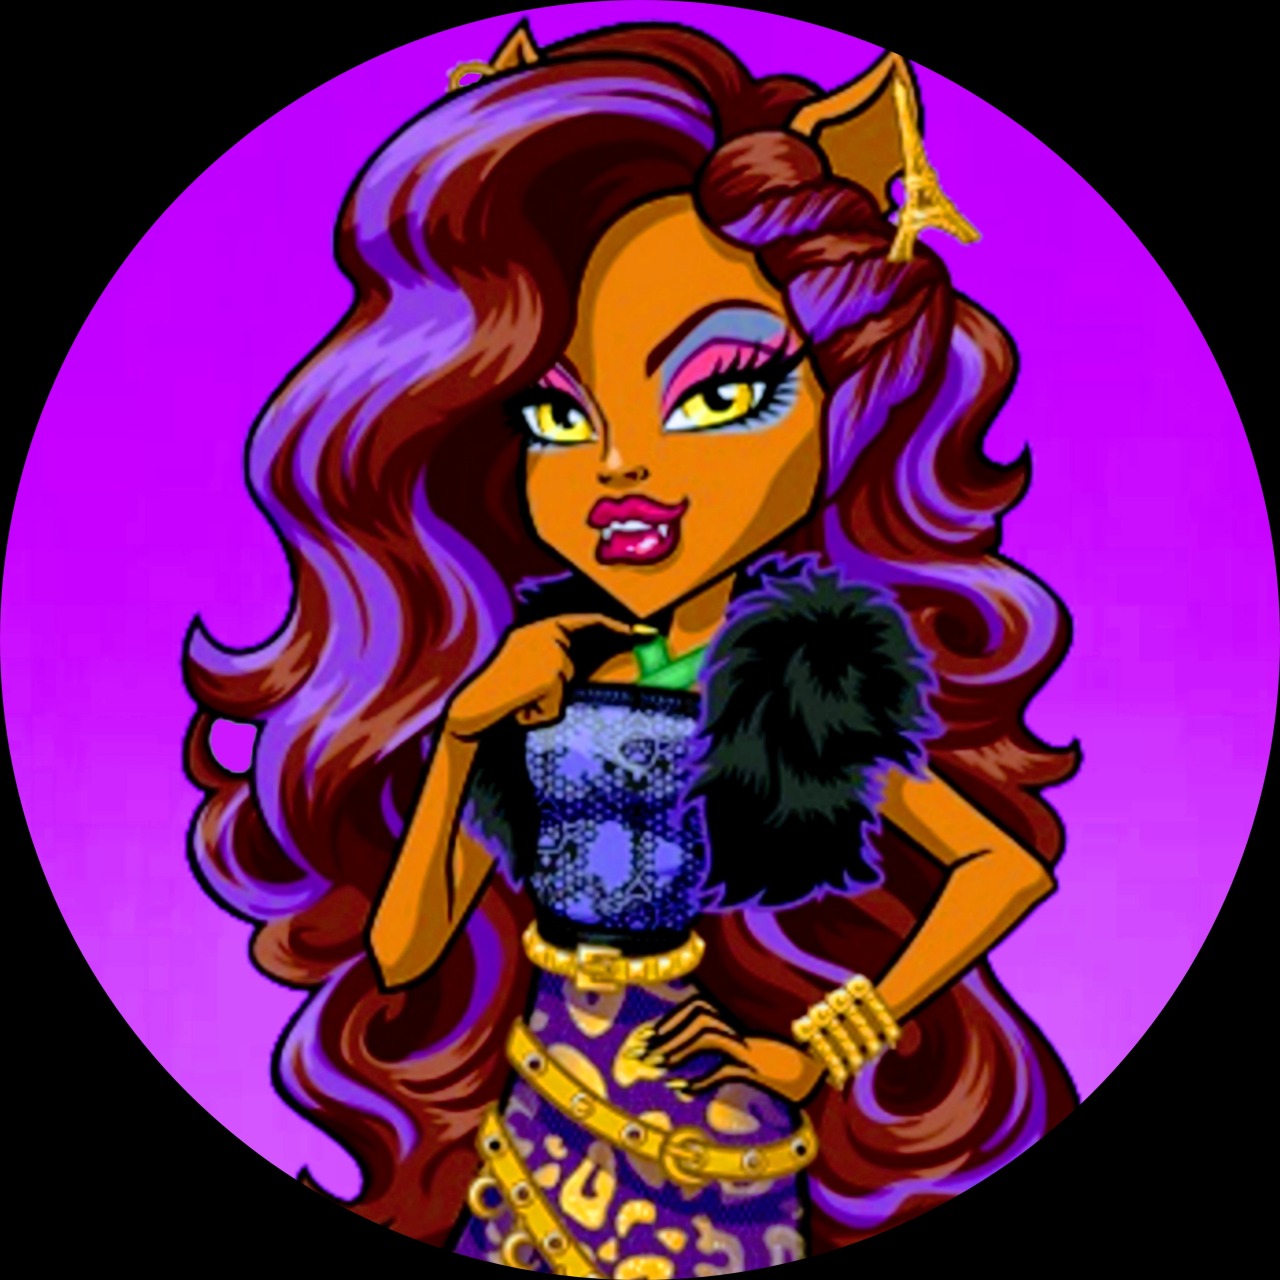 Monster High Icons (Close-up)Like and/or reblog if you save/use #monster high #scaris: city of frights #clawdeen wolf#frankie stein#draculaura#sparkly#glitter#close-up#icons#circle icons #icons by me